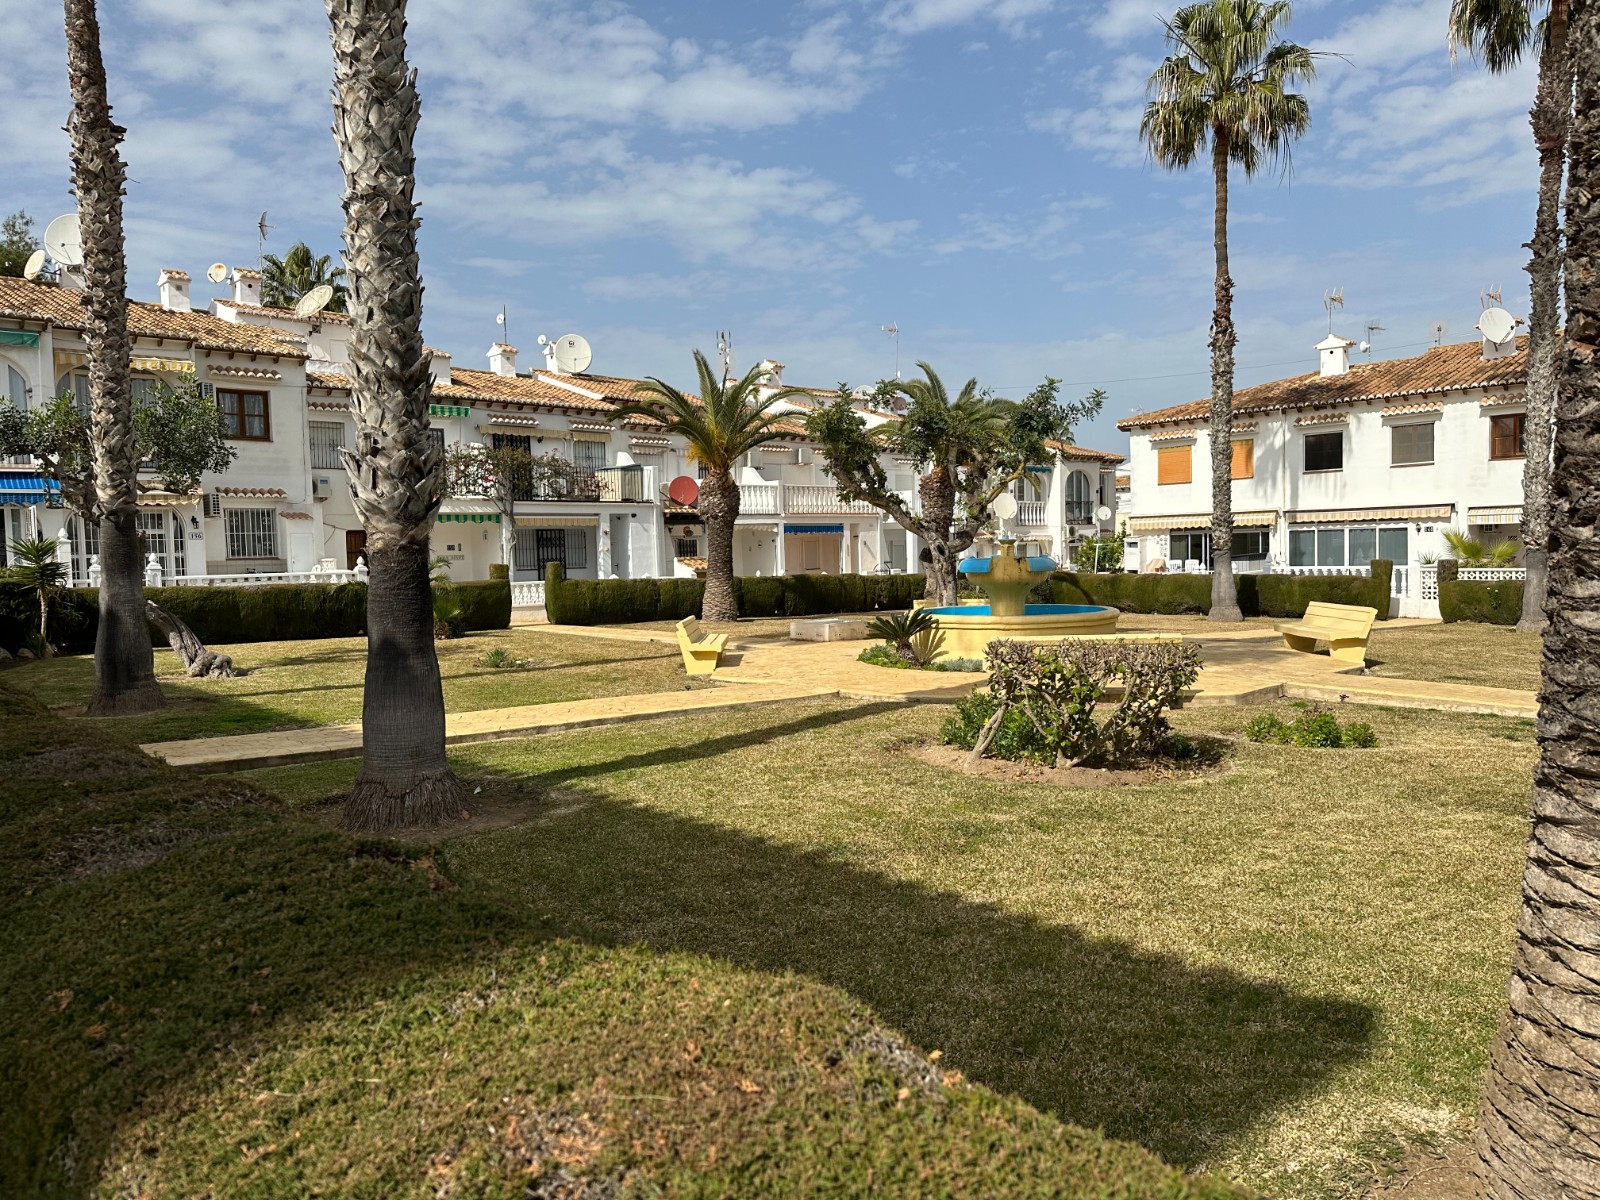 For sale: 1 bedroom apartment / flat in Torrevieja